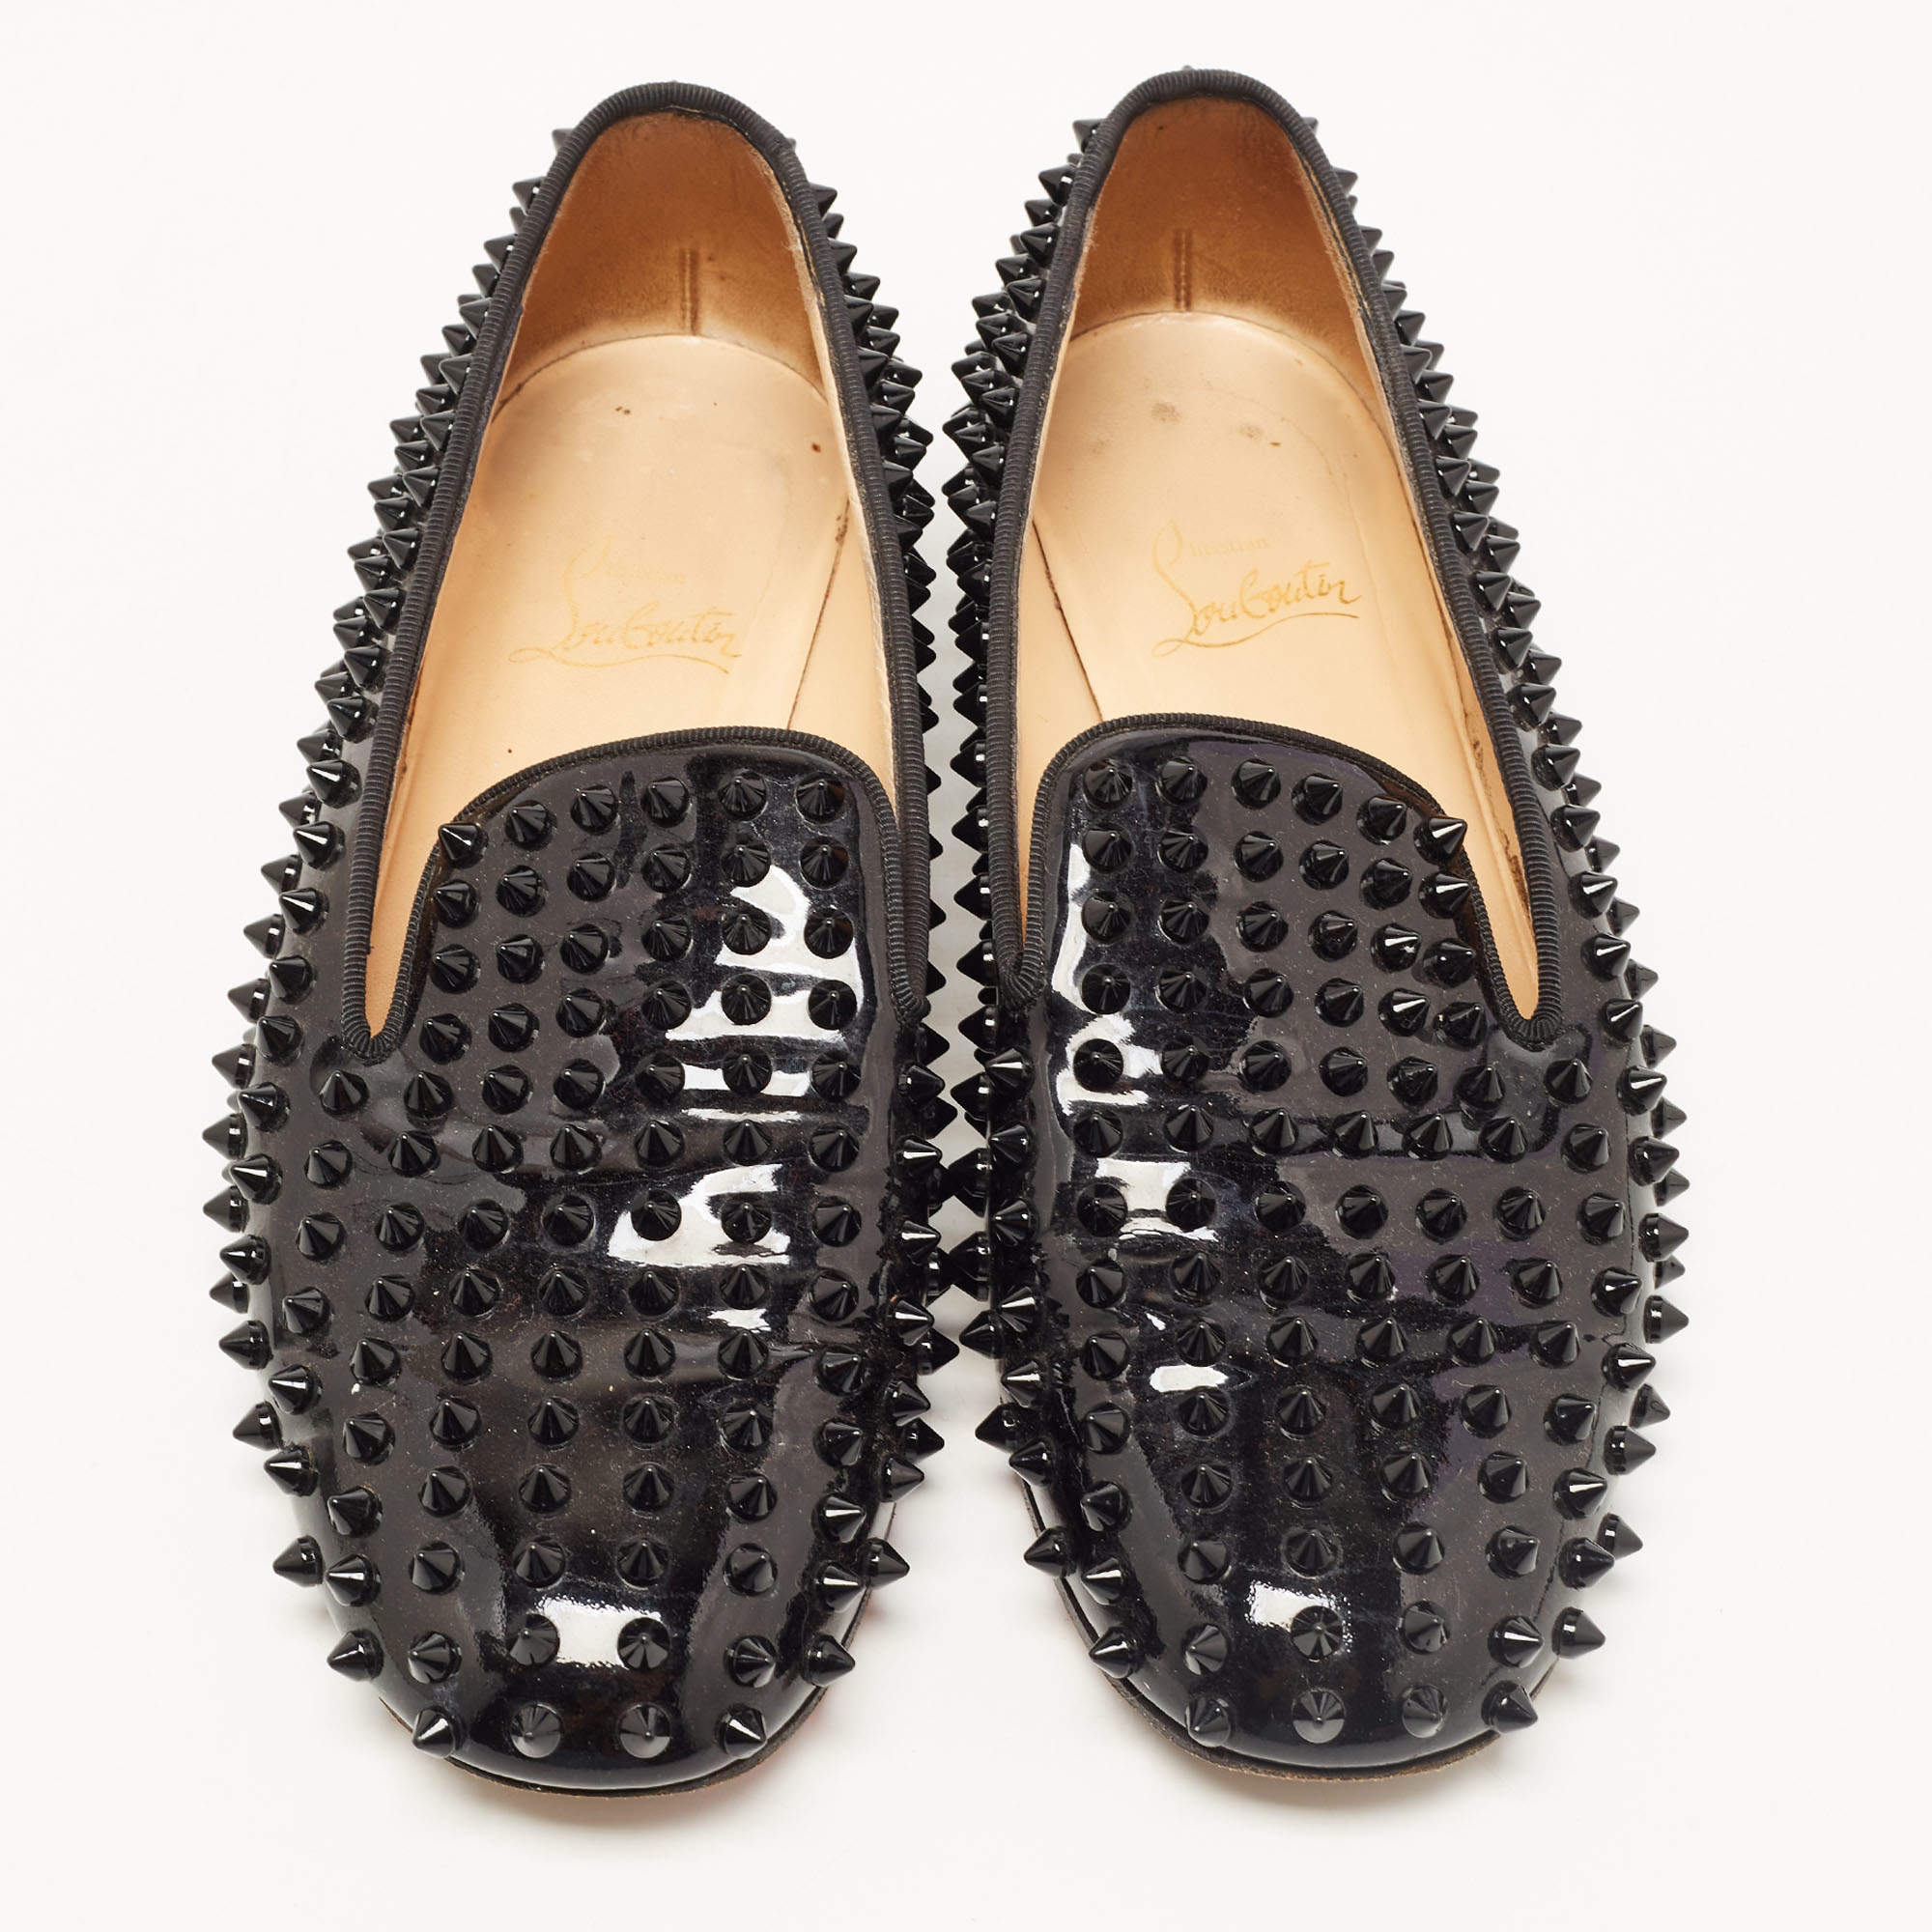 Christian Louboutin Black Patent Leather Dandelion Spikes Smoking Slippers  Size 38